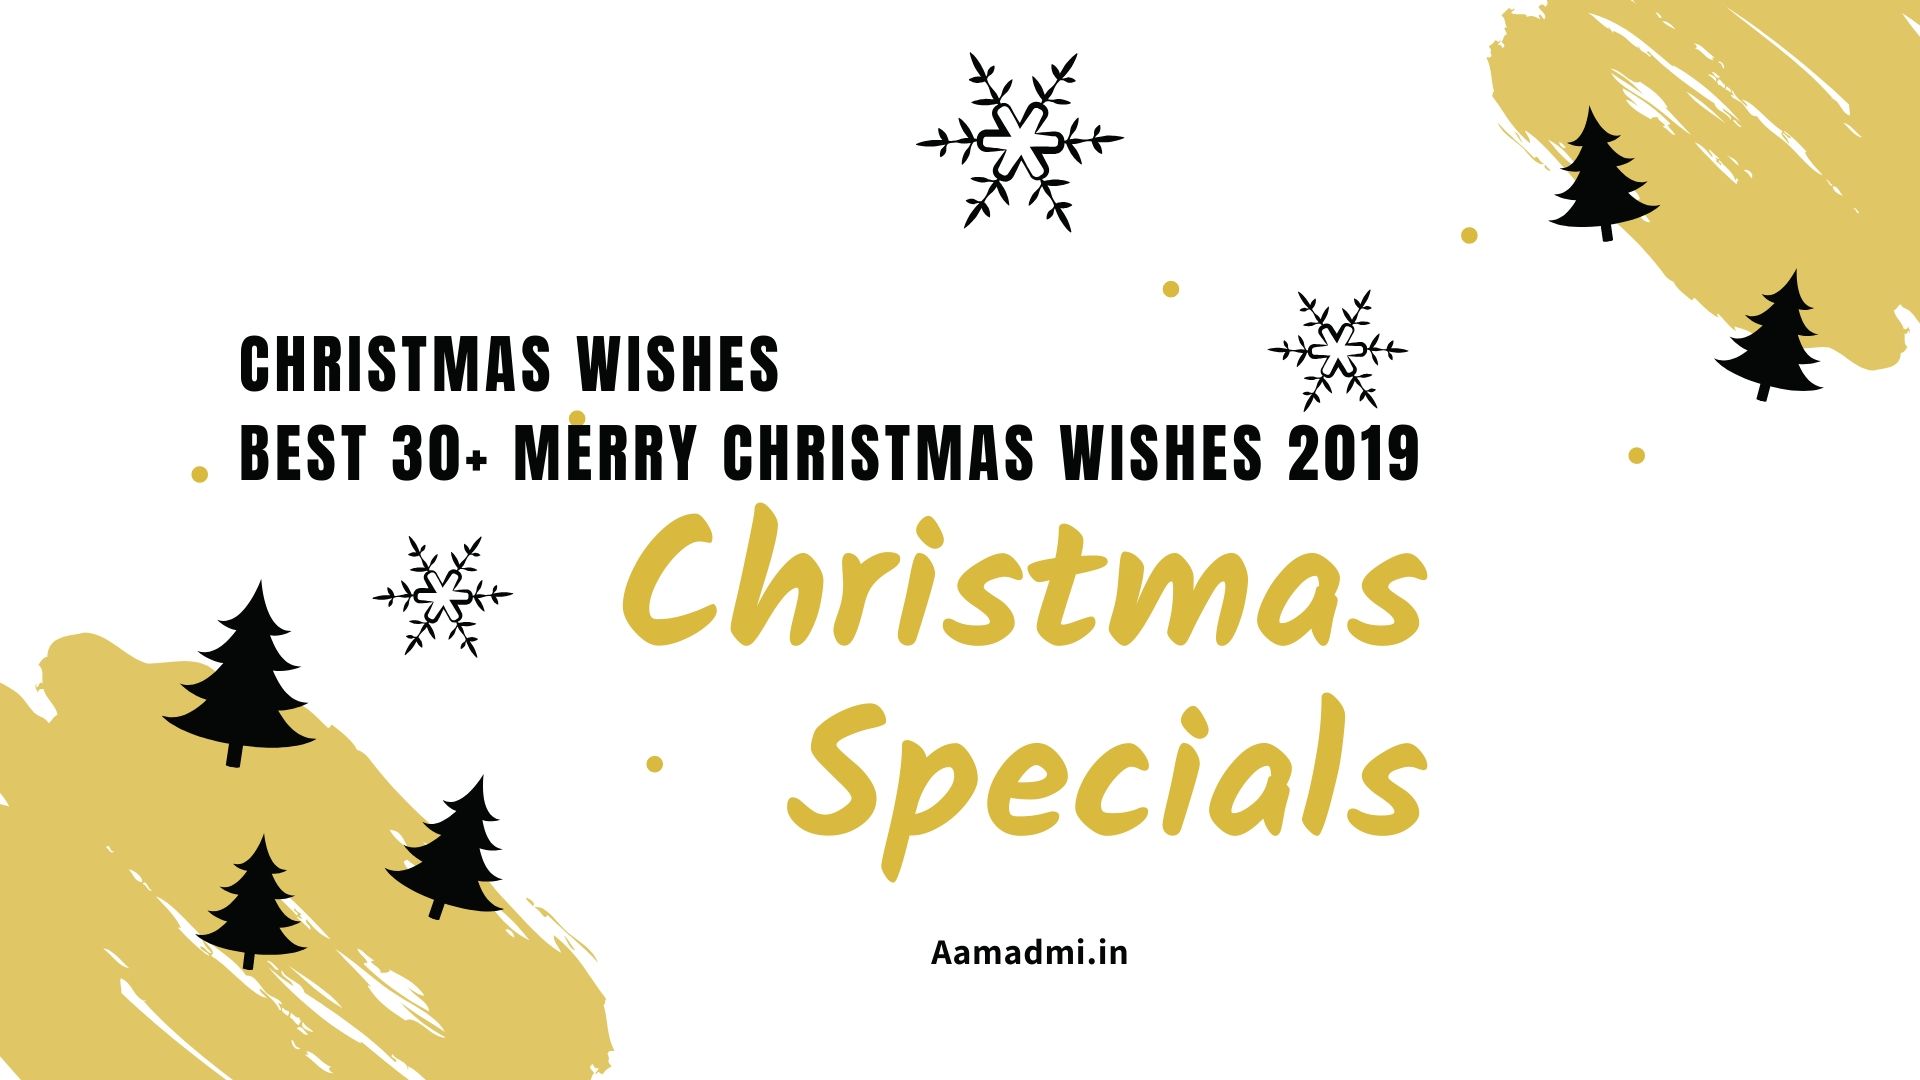 We Are Sharing Best 100 Merry Christmas Wishes 2019 - Merry Christmas Wishes Hd - HD Wallpaper 